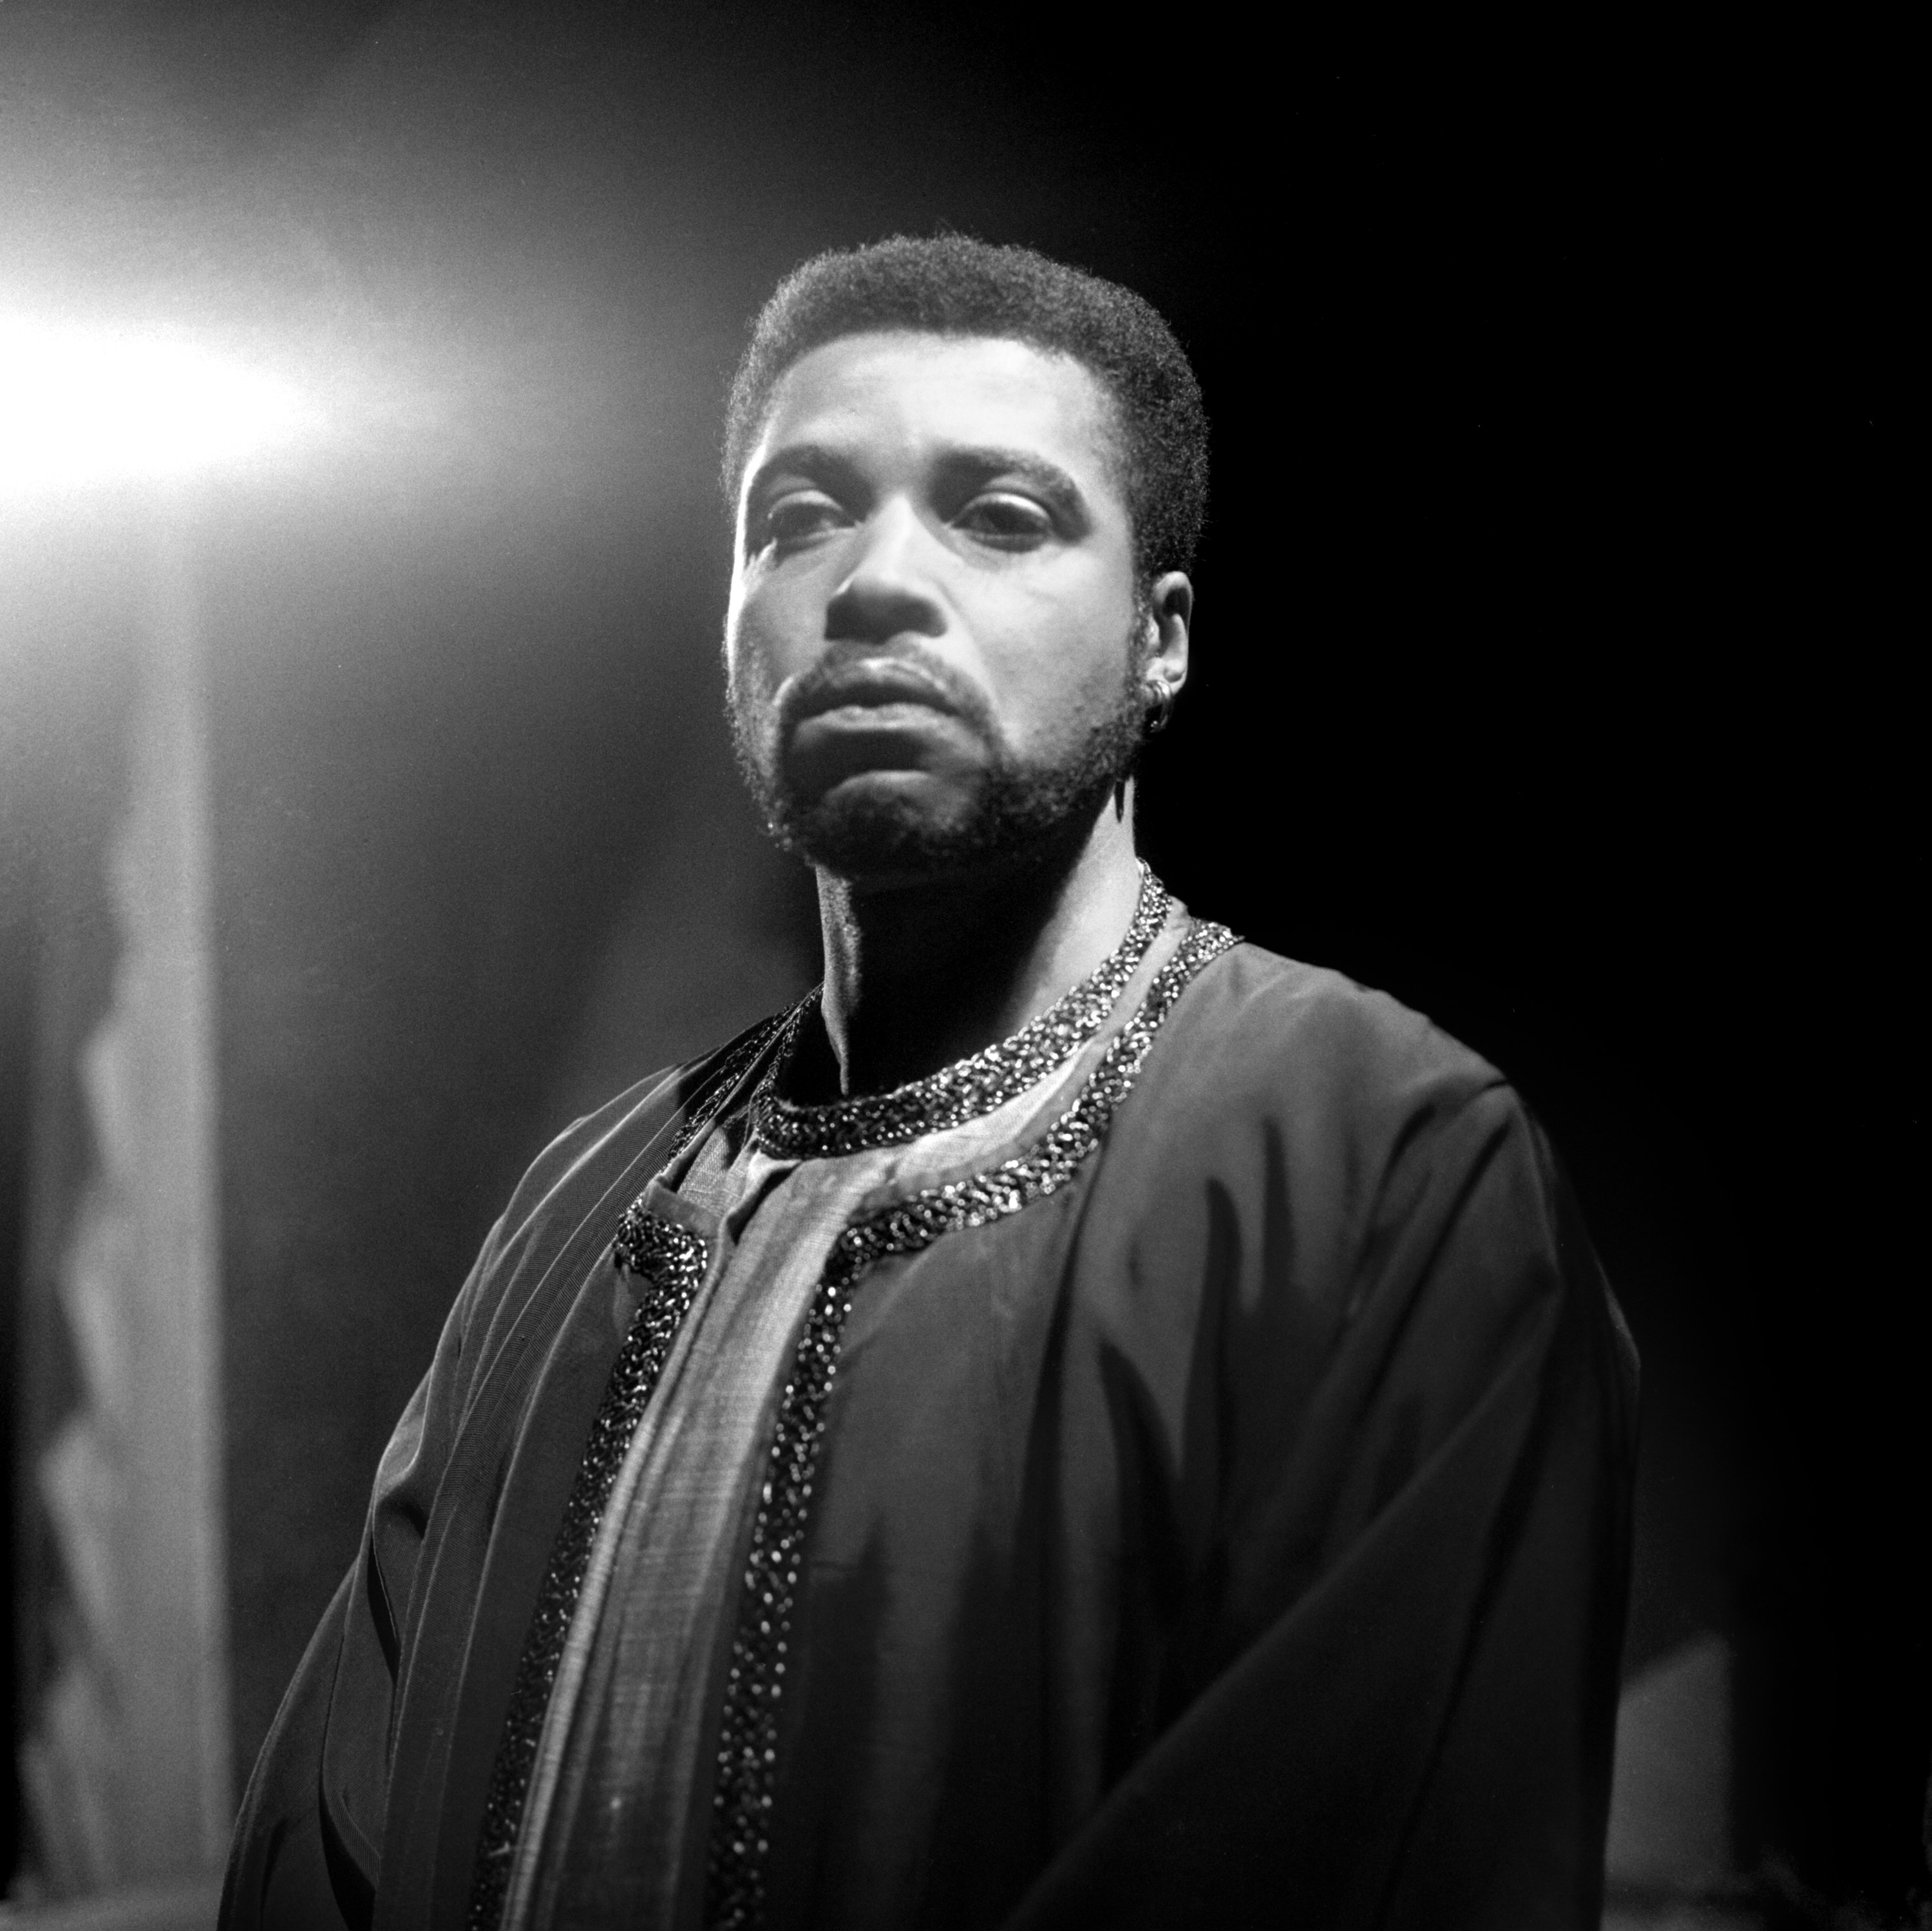 James Earl Jones with a beard and dressed as Othello